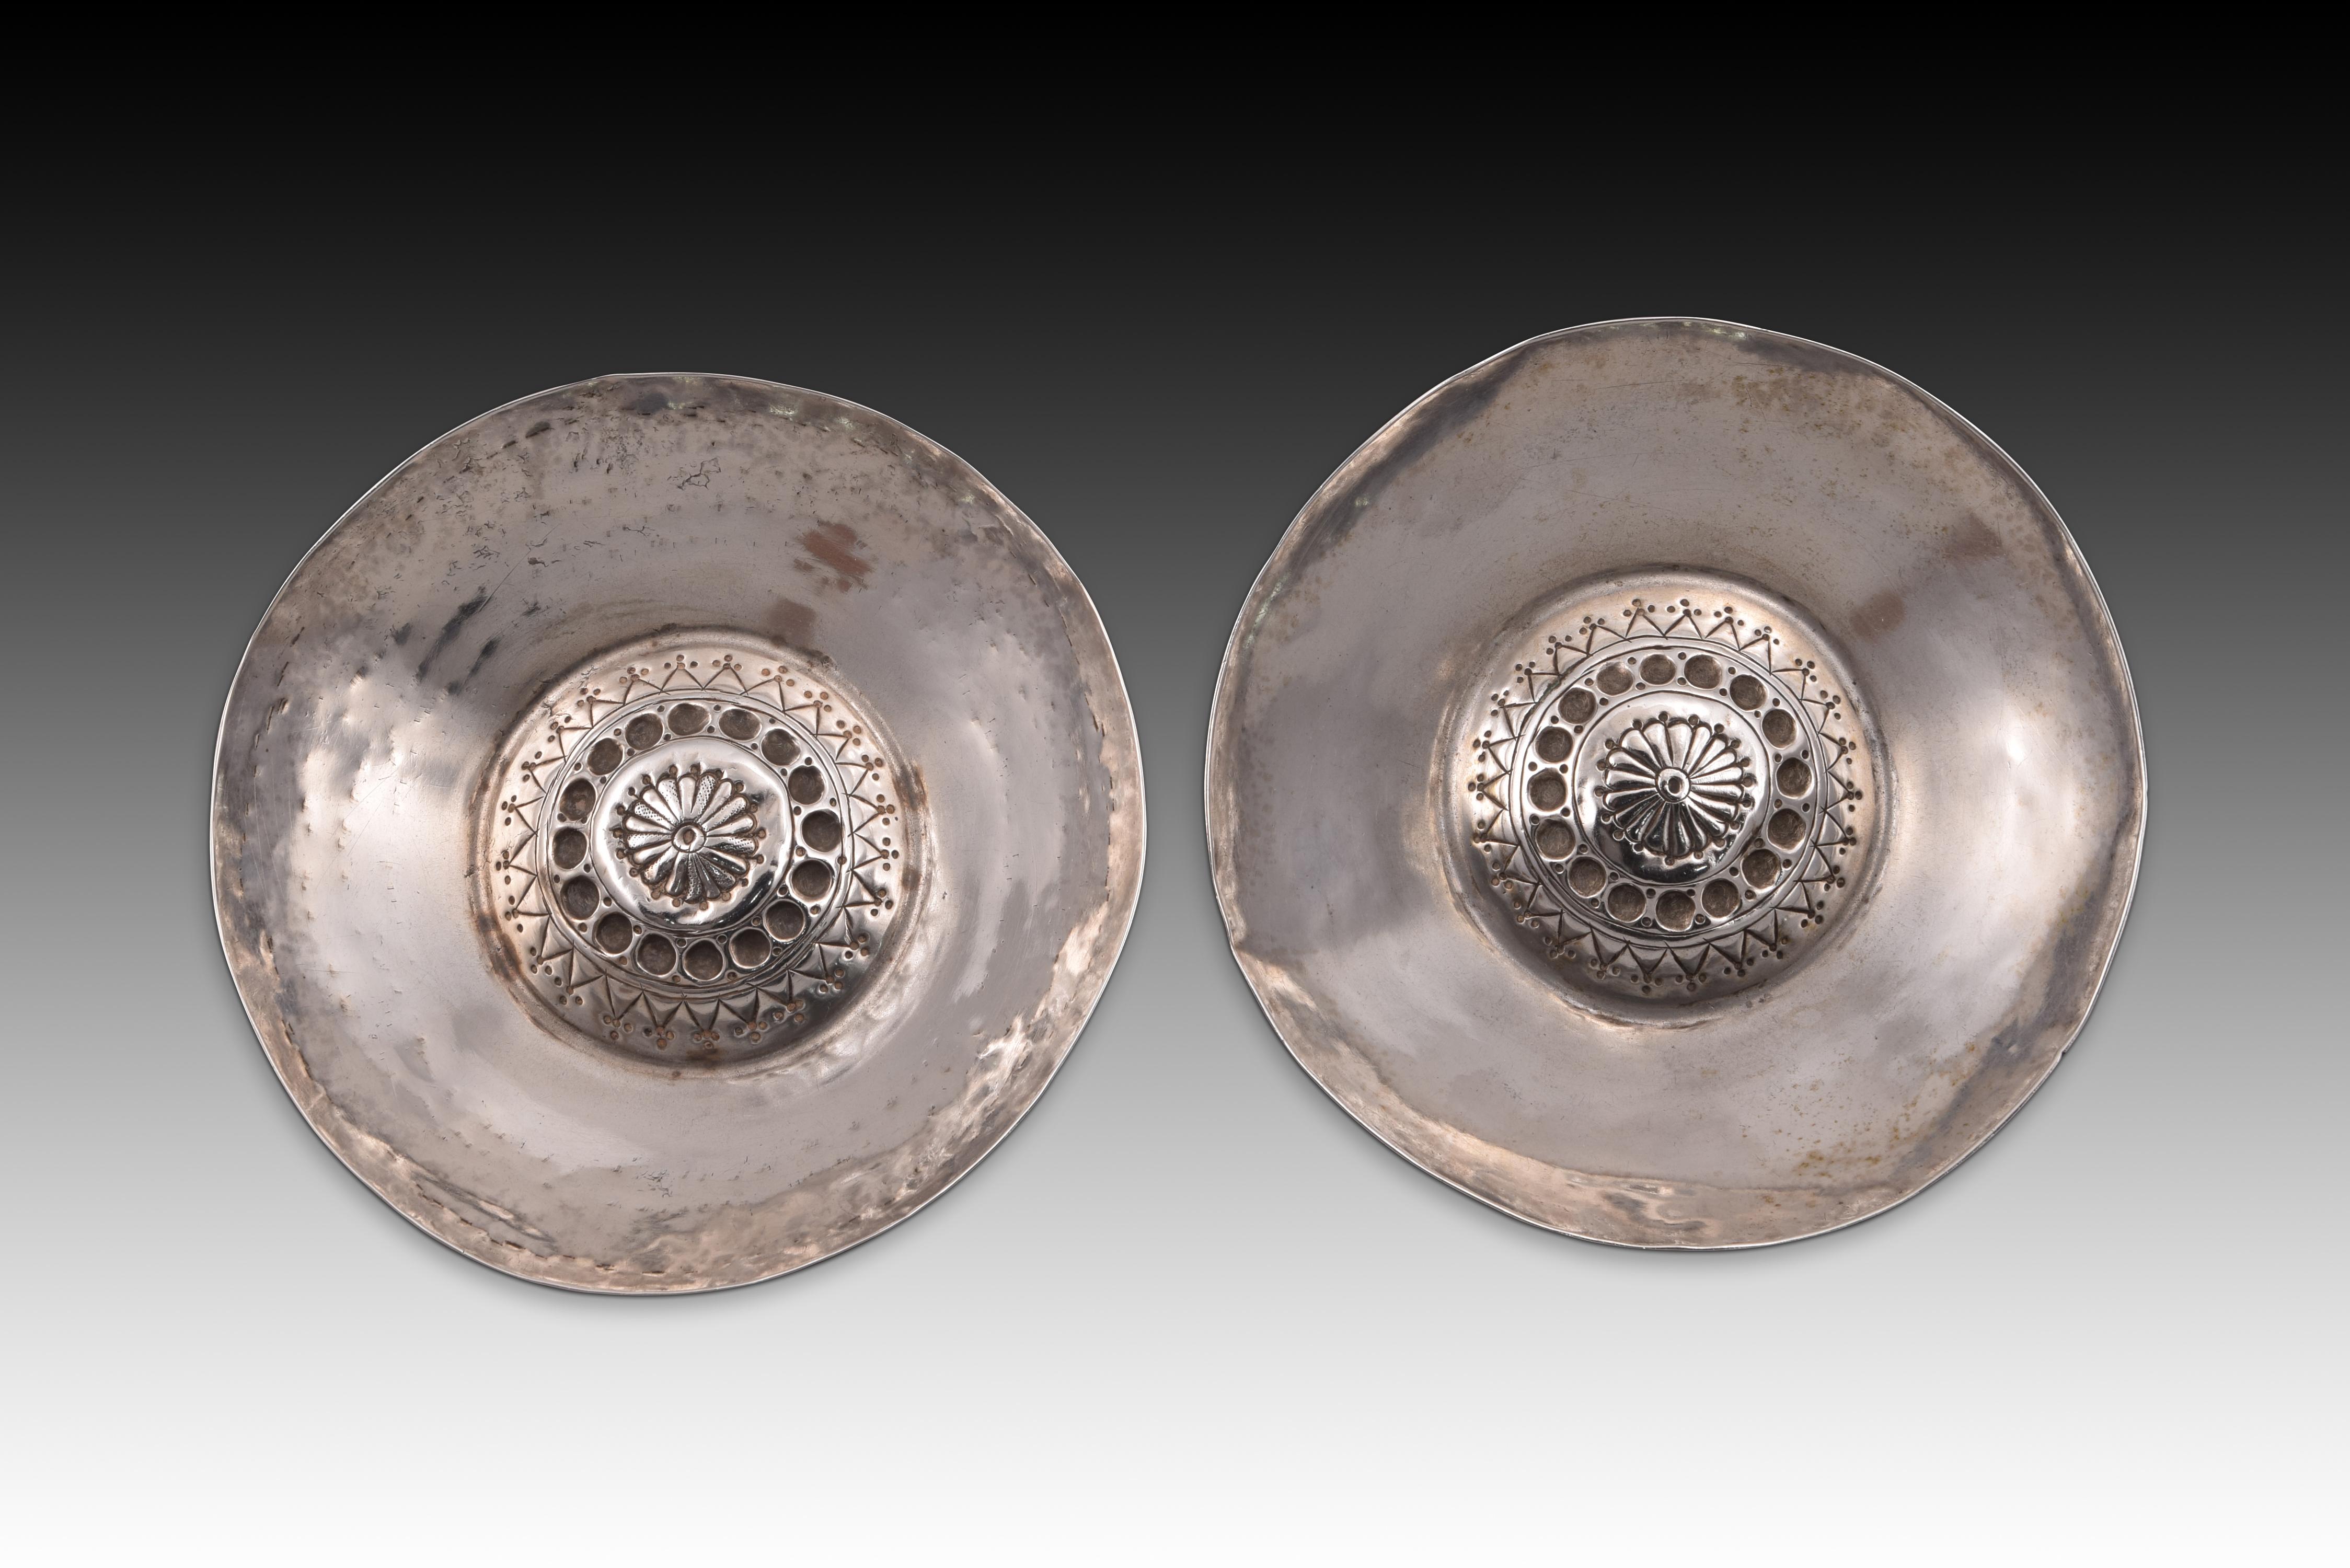 Pair of catavinos. Silver. XVII century. 
Pair of glasses or mugs for drinking wine made of silver in its color that have a small and low cylindrical foot, a flared rim towards the top and a central area curved upwards, which has been decorated